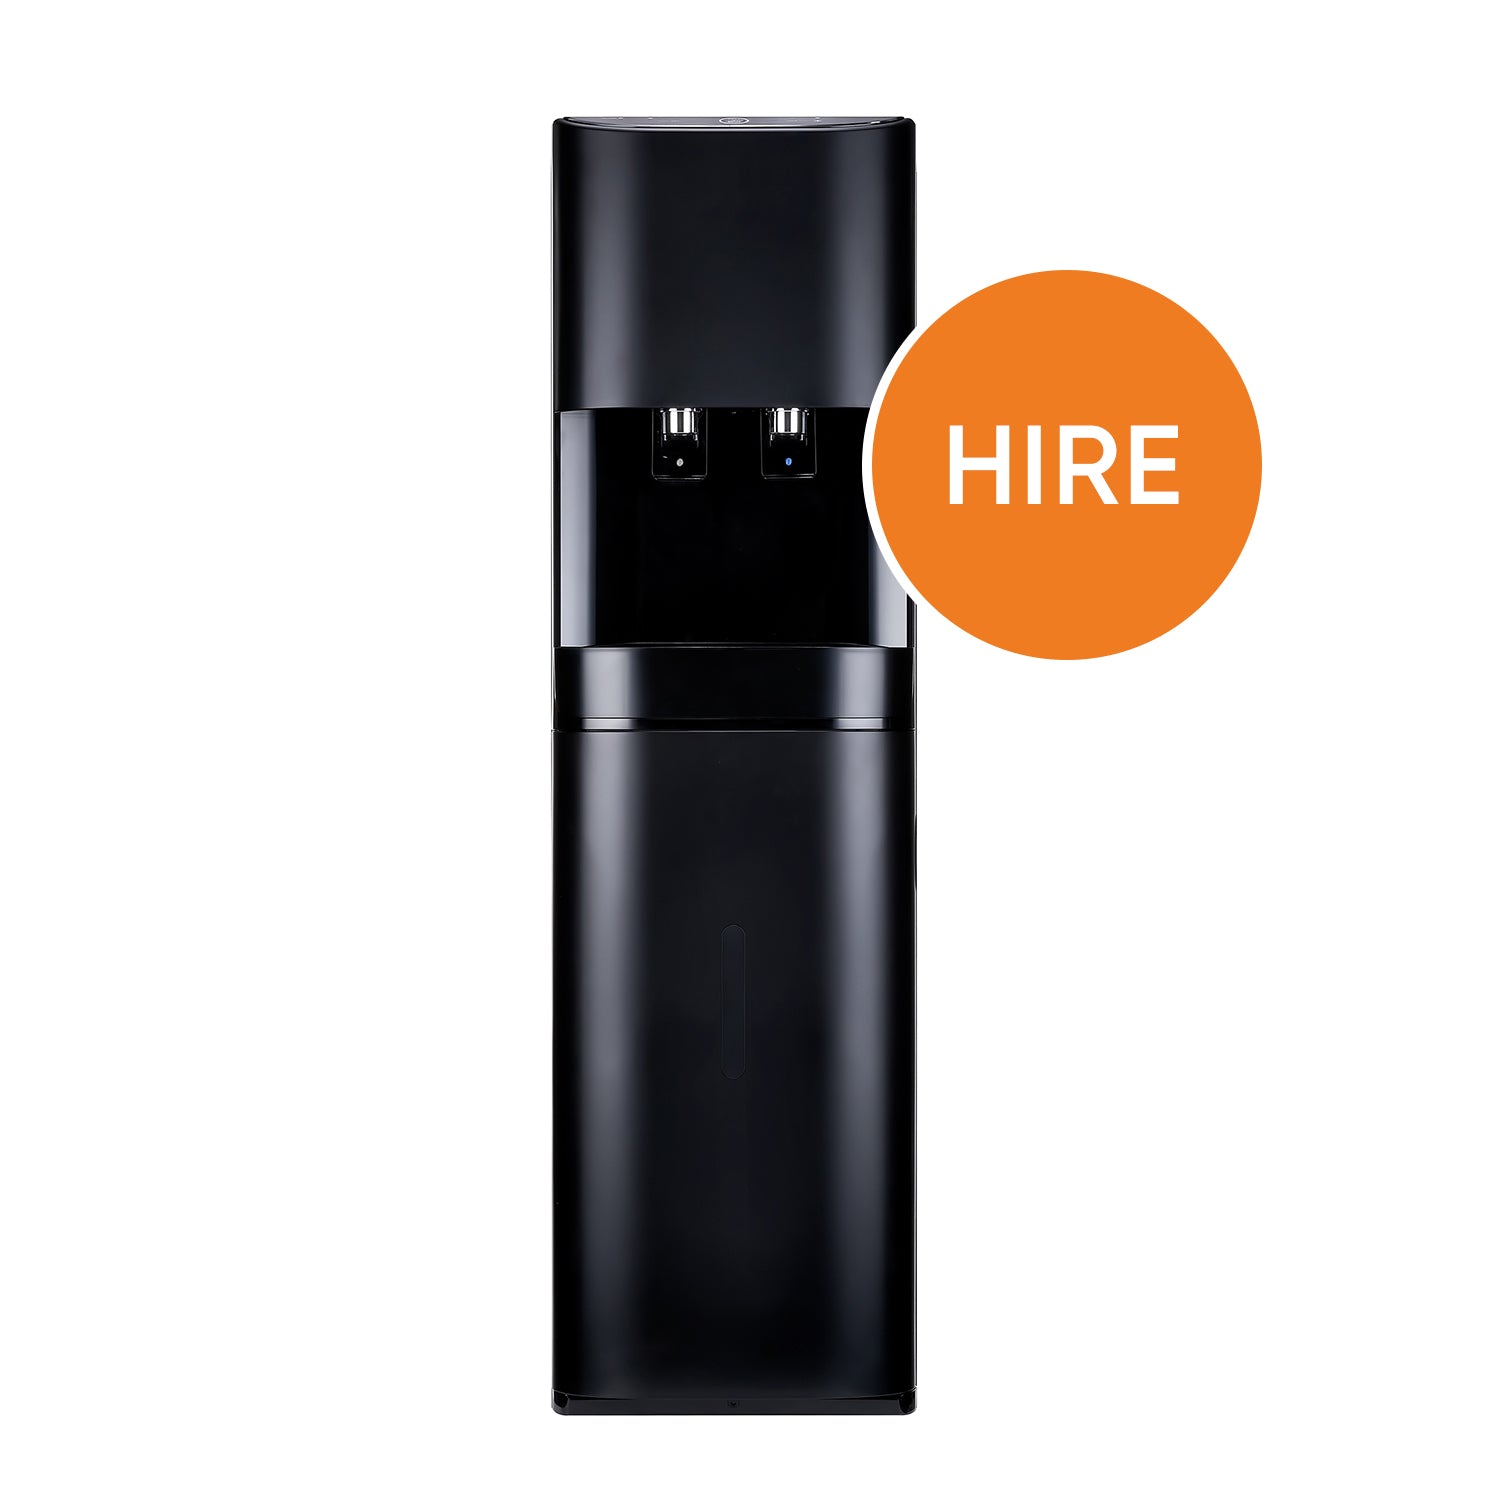 Black Water Filtration System for Hire